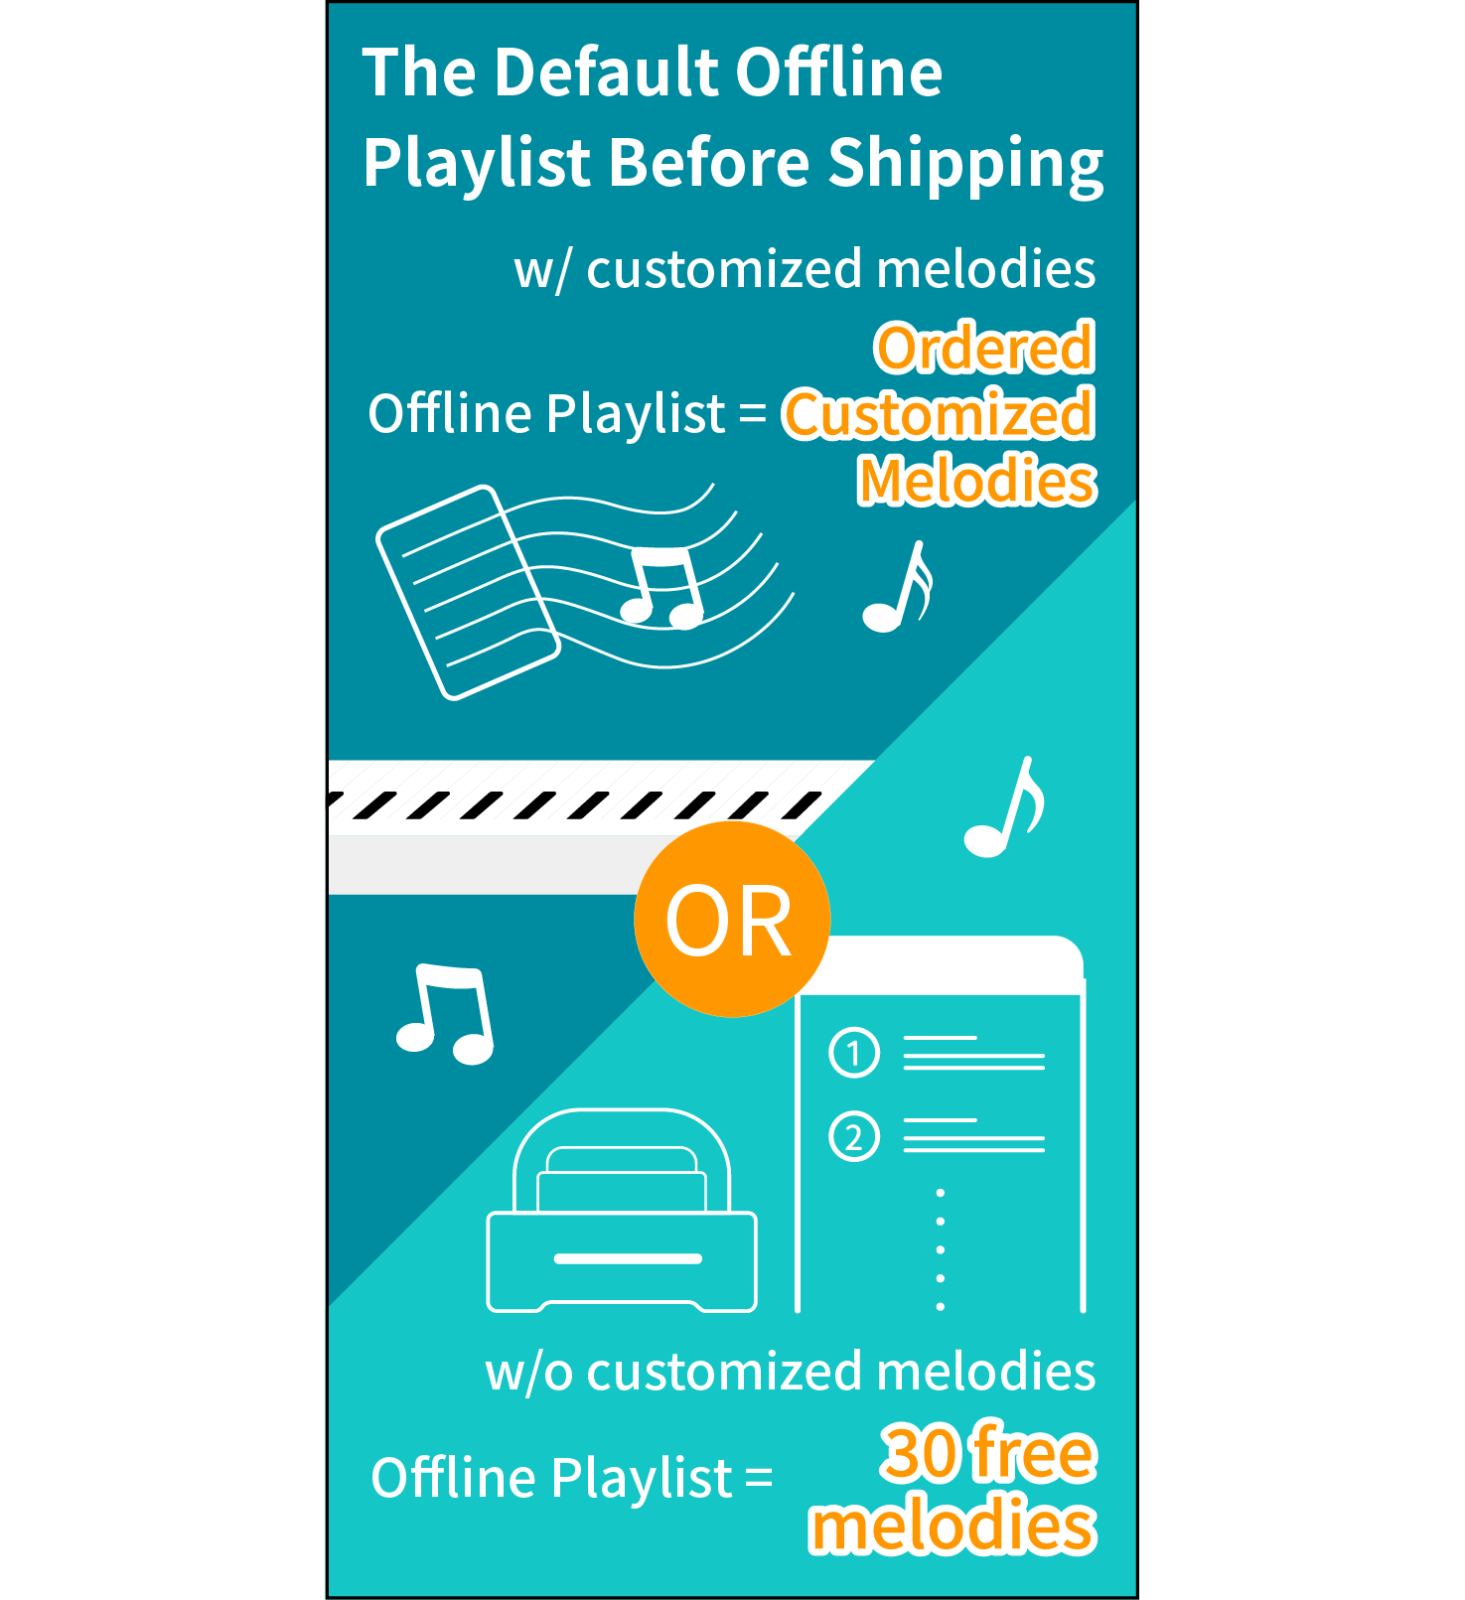 The Default Offline Playlist before Shipping: *If you did not add any customized melodies to your order, we will give you 30 free melodies in this offline playlist, including famous classical melodies, original melodies, and children’s songs, all of them were arranged by professional music arrangers. (For listening to the default 30 melodies uploaded by our team, please search “muro box” in the LIBRARY tab.) *If you have ordered customized melodies,we will upload your melodies into your offline playlist for you to prepare the important gift more easily. The gift receiver only needs to press the knob to listen to the melody you prepared for her / him.This thoughtful design will impress the gift receiver!  You/The gift receiver can update the offline playlist after receiving the product. Please follow step 6 to add/decrease  melodies when managing the content of an offline playlist.